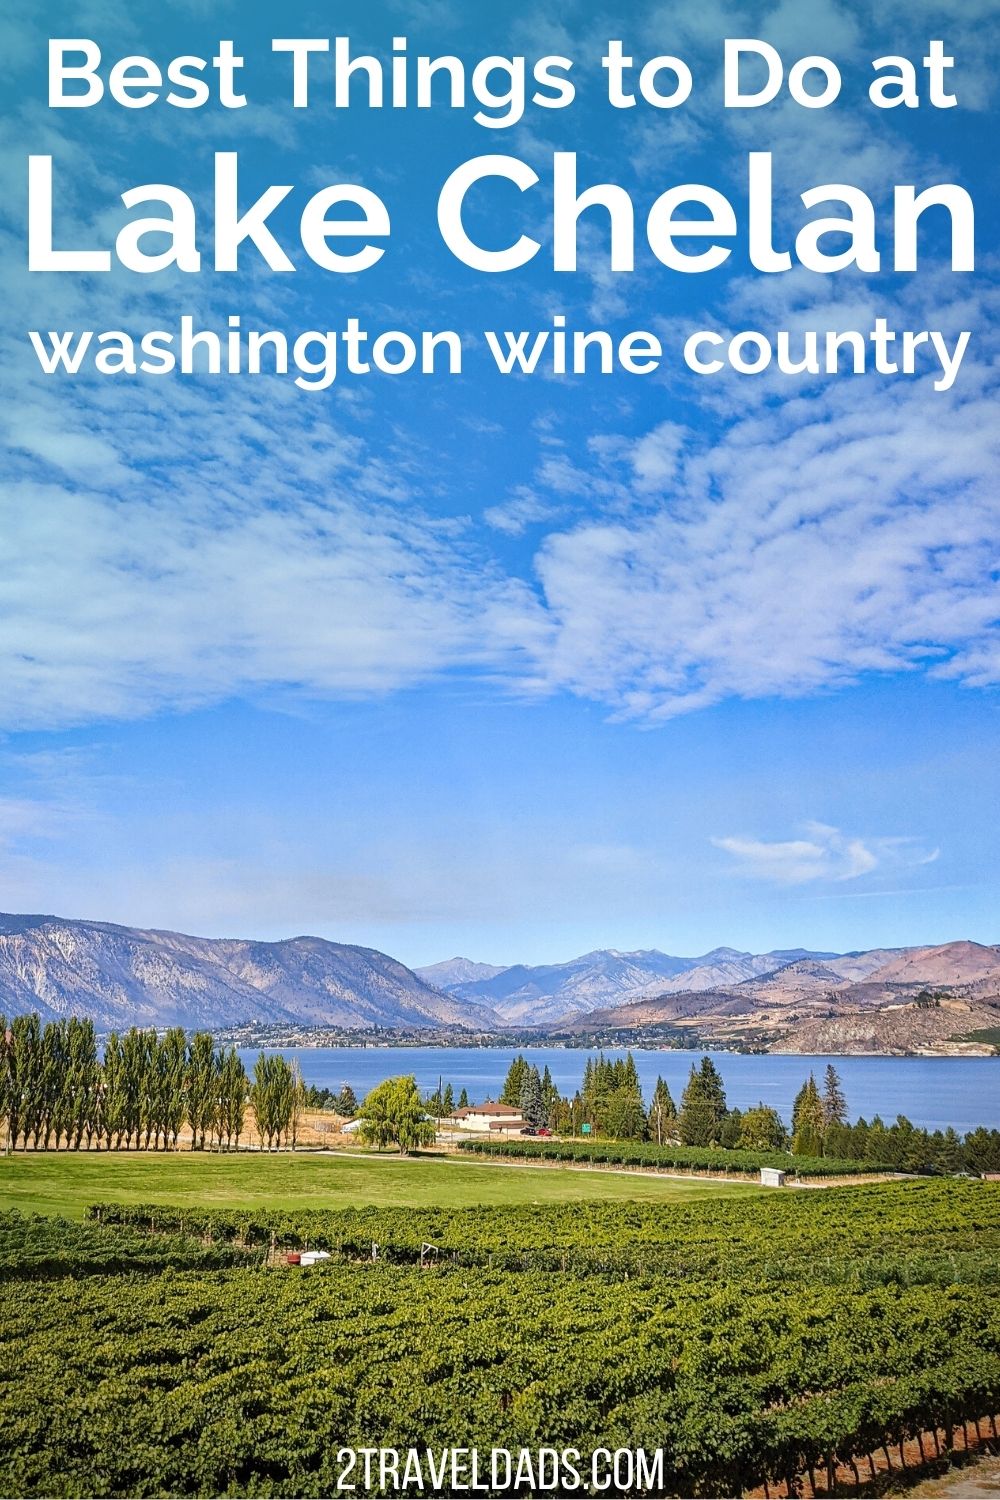 With so many things to do at Lake Chelan, it's no wonder this part of Washington Wine Country is so popular with locals. Wine tasting, hiking, boating and more, plan a fun vacation to Washington's year-round playground.